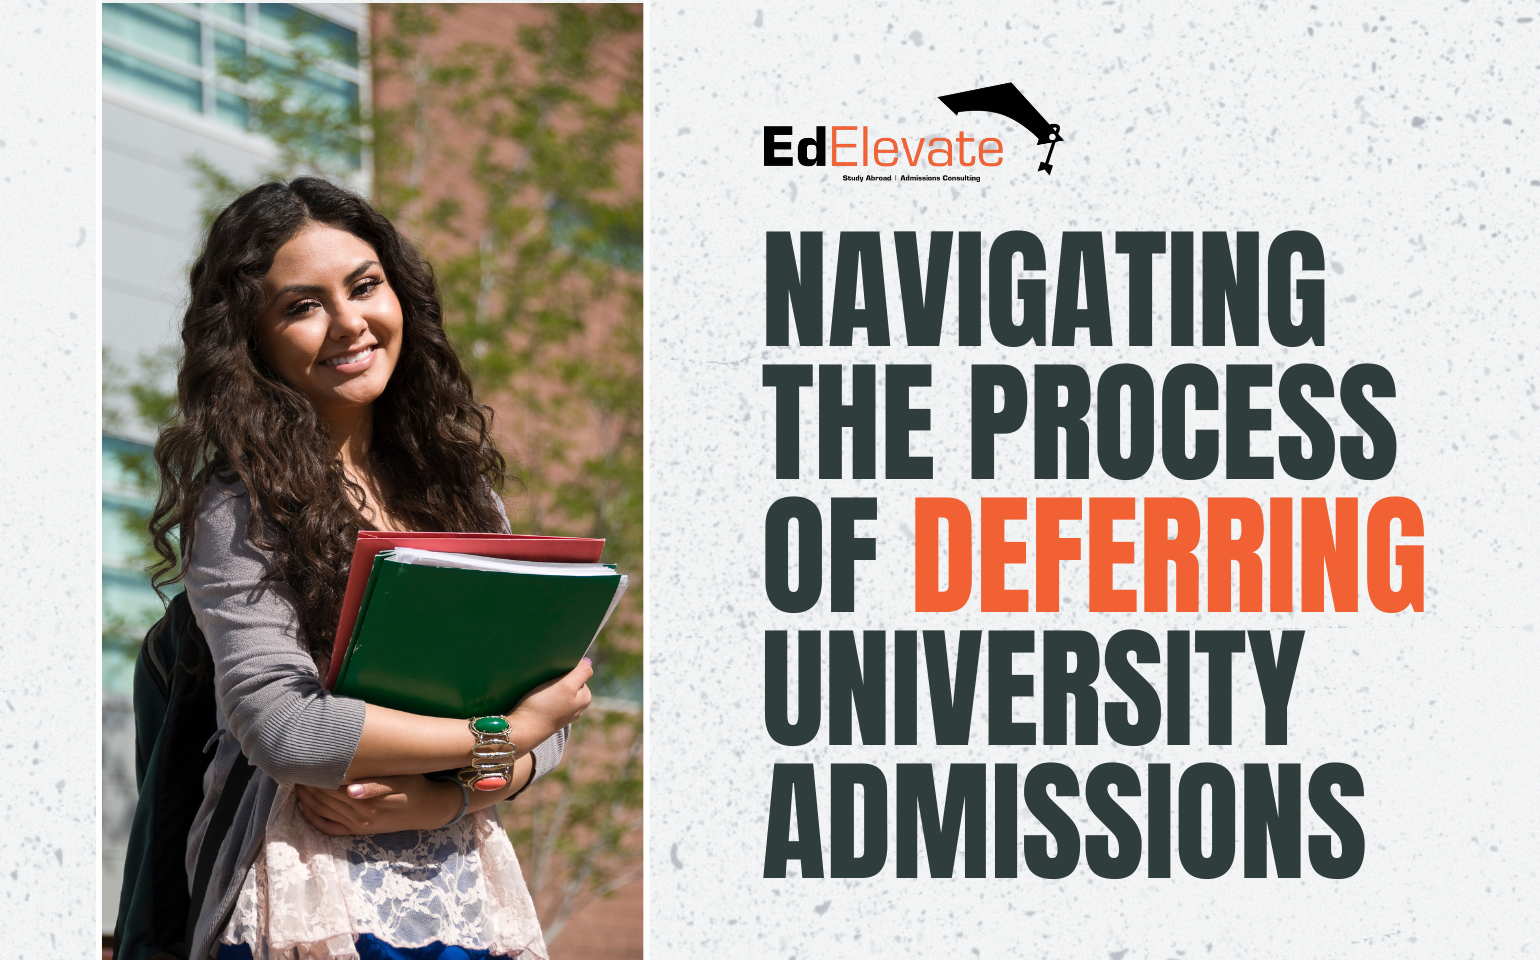 Navigating the Process of Deferring University Admission